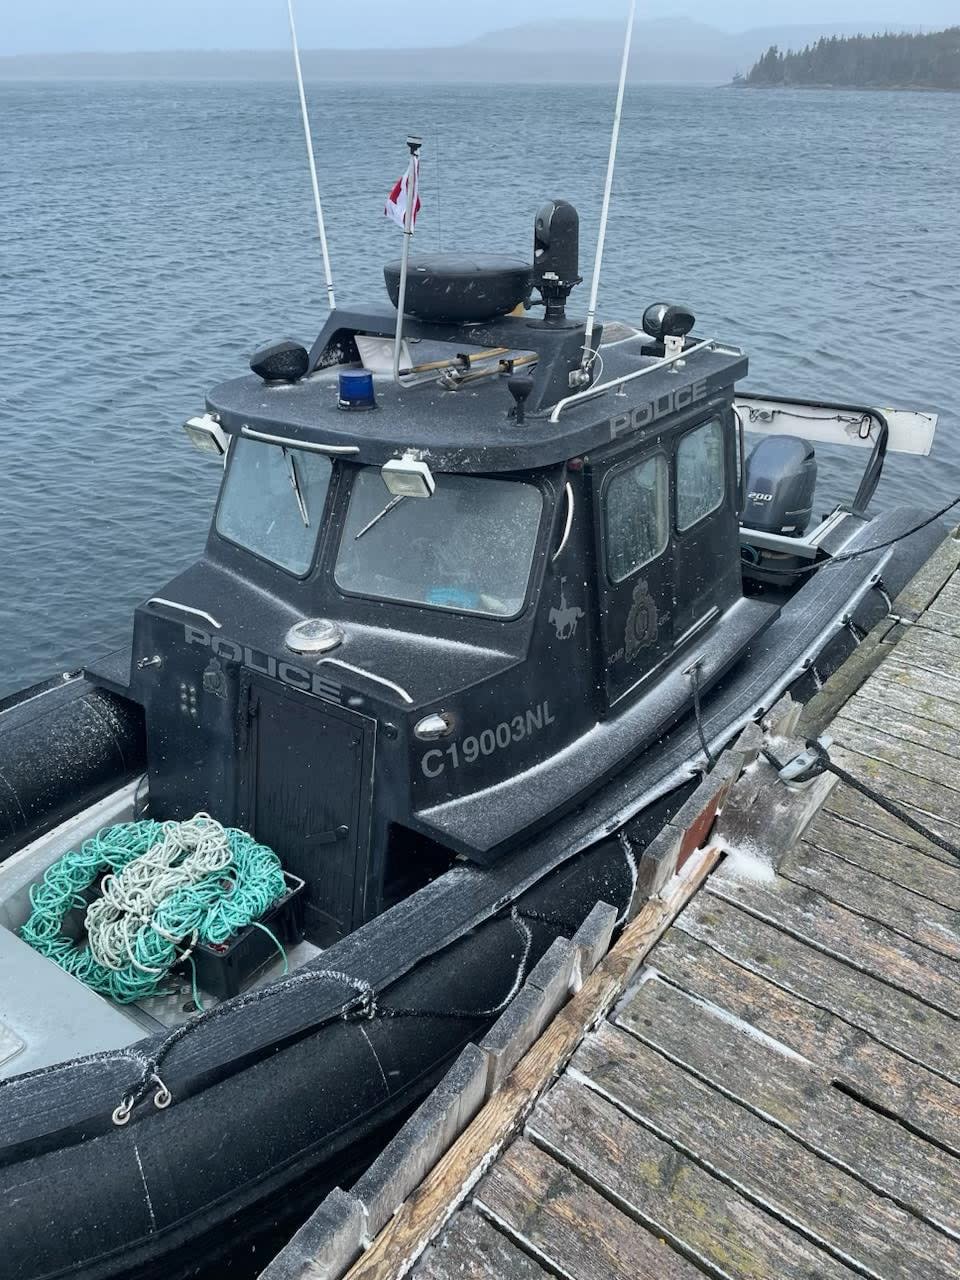 RCMP boats have been spotted around Northwest Arm, which is located near Dean Penney's cabin.